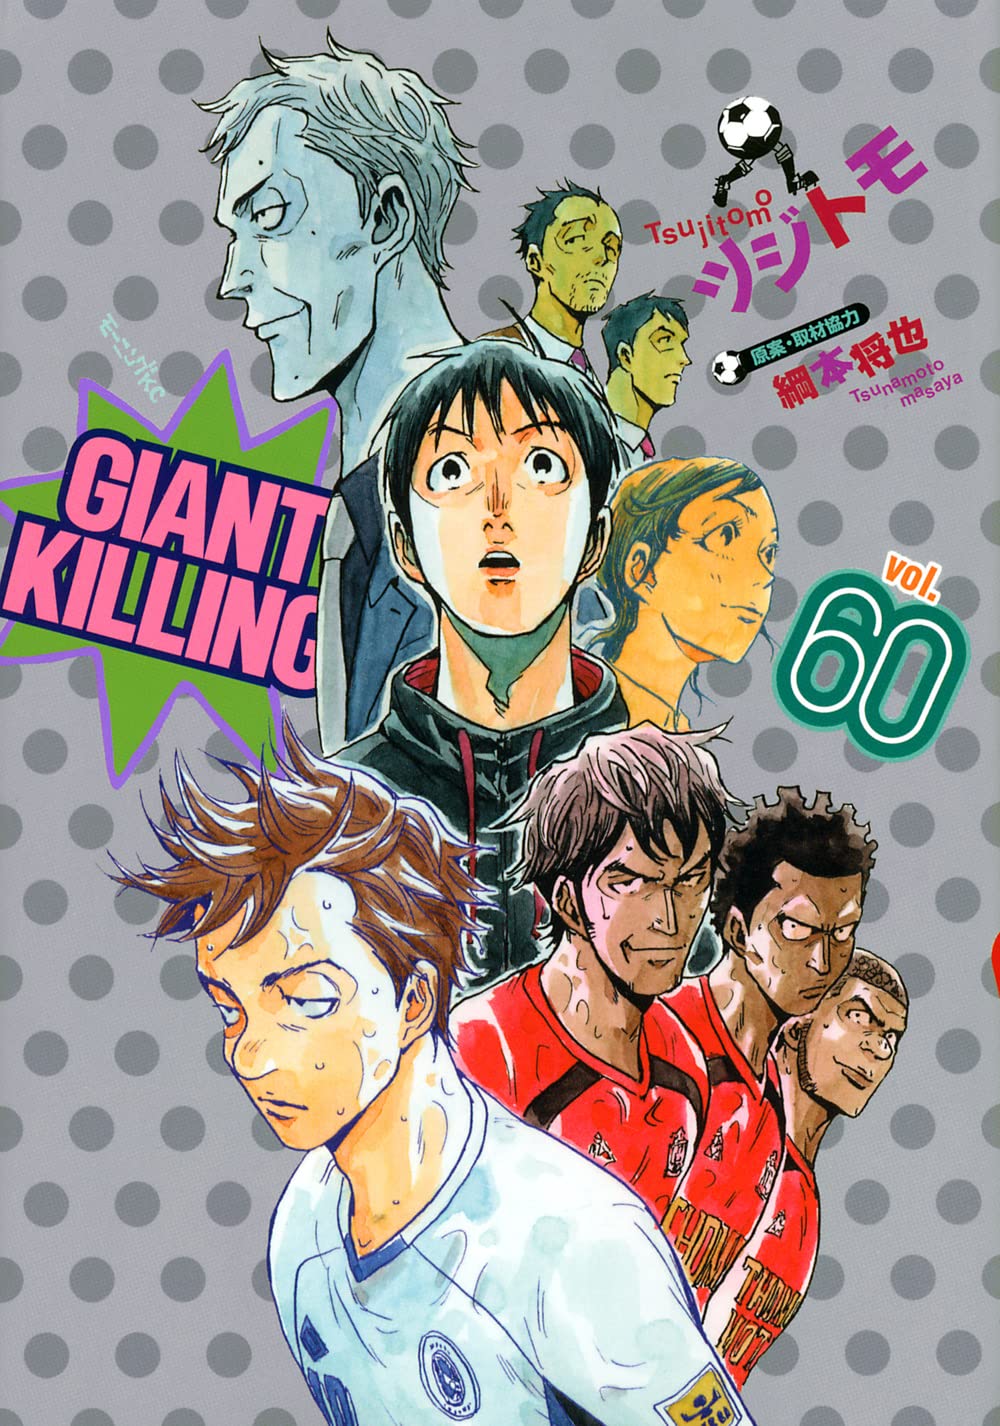 Giant killing capitulo 19, By Giant killing